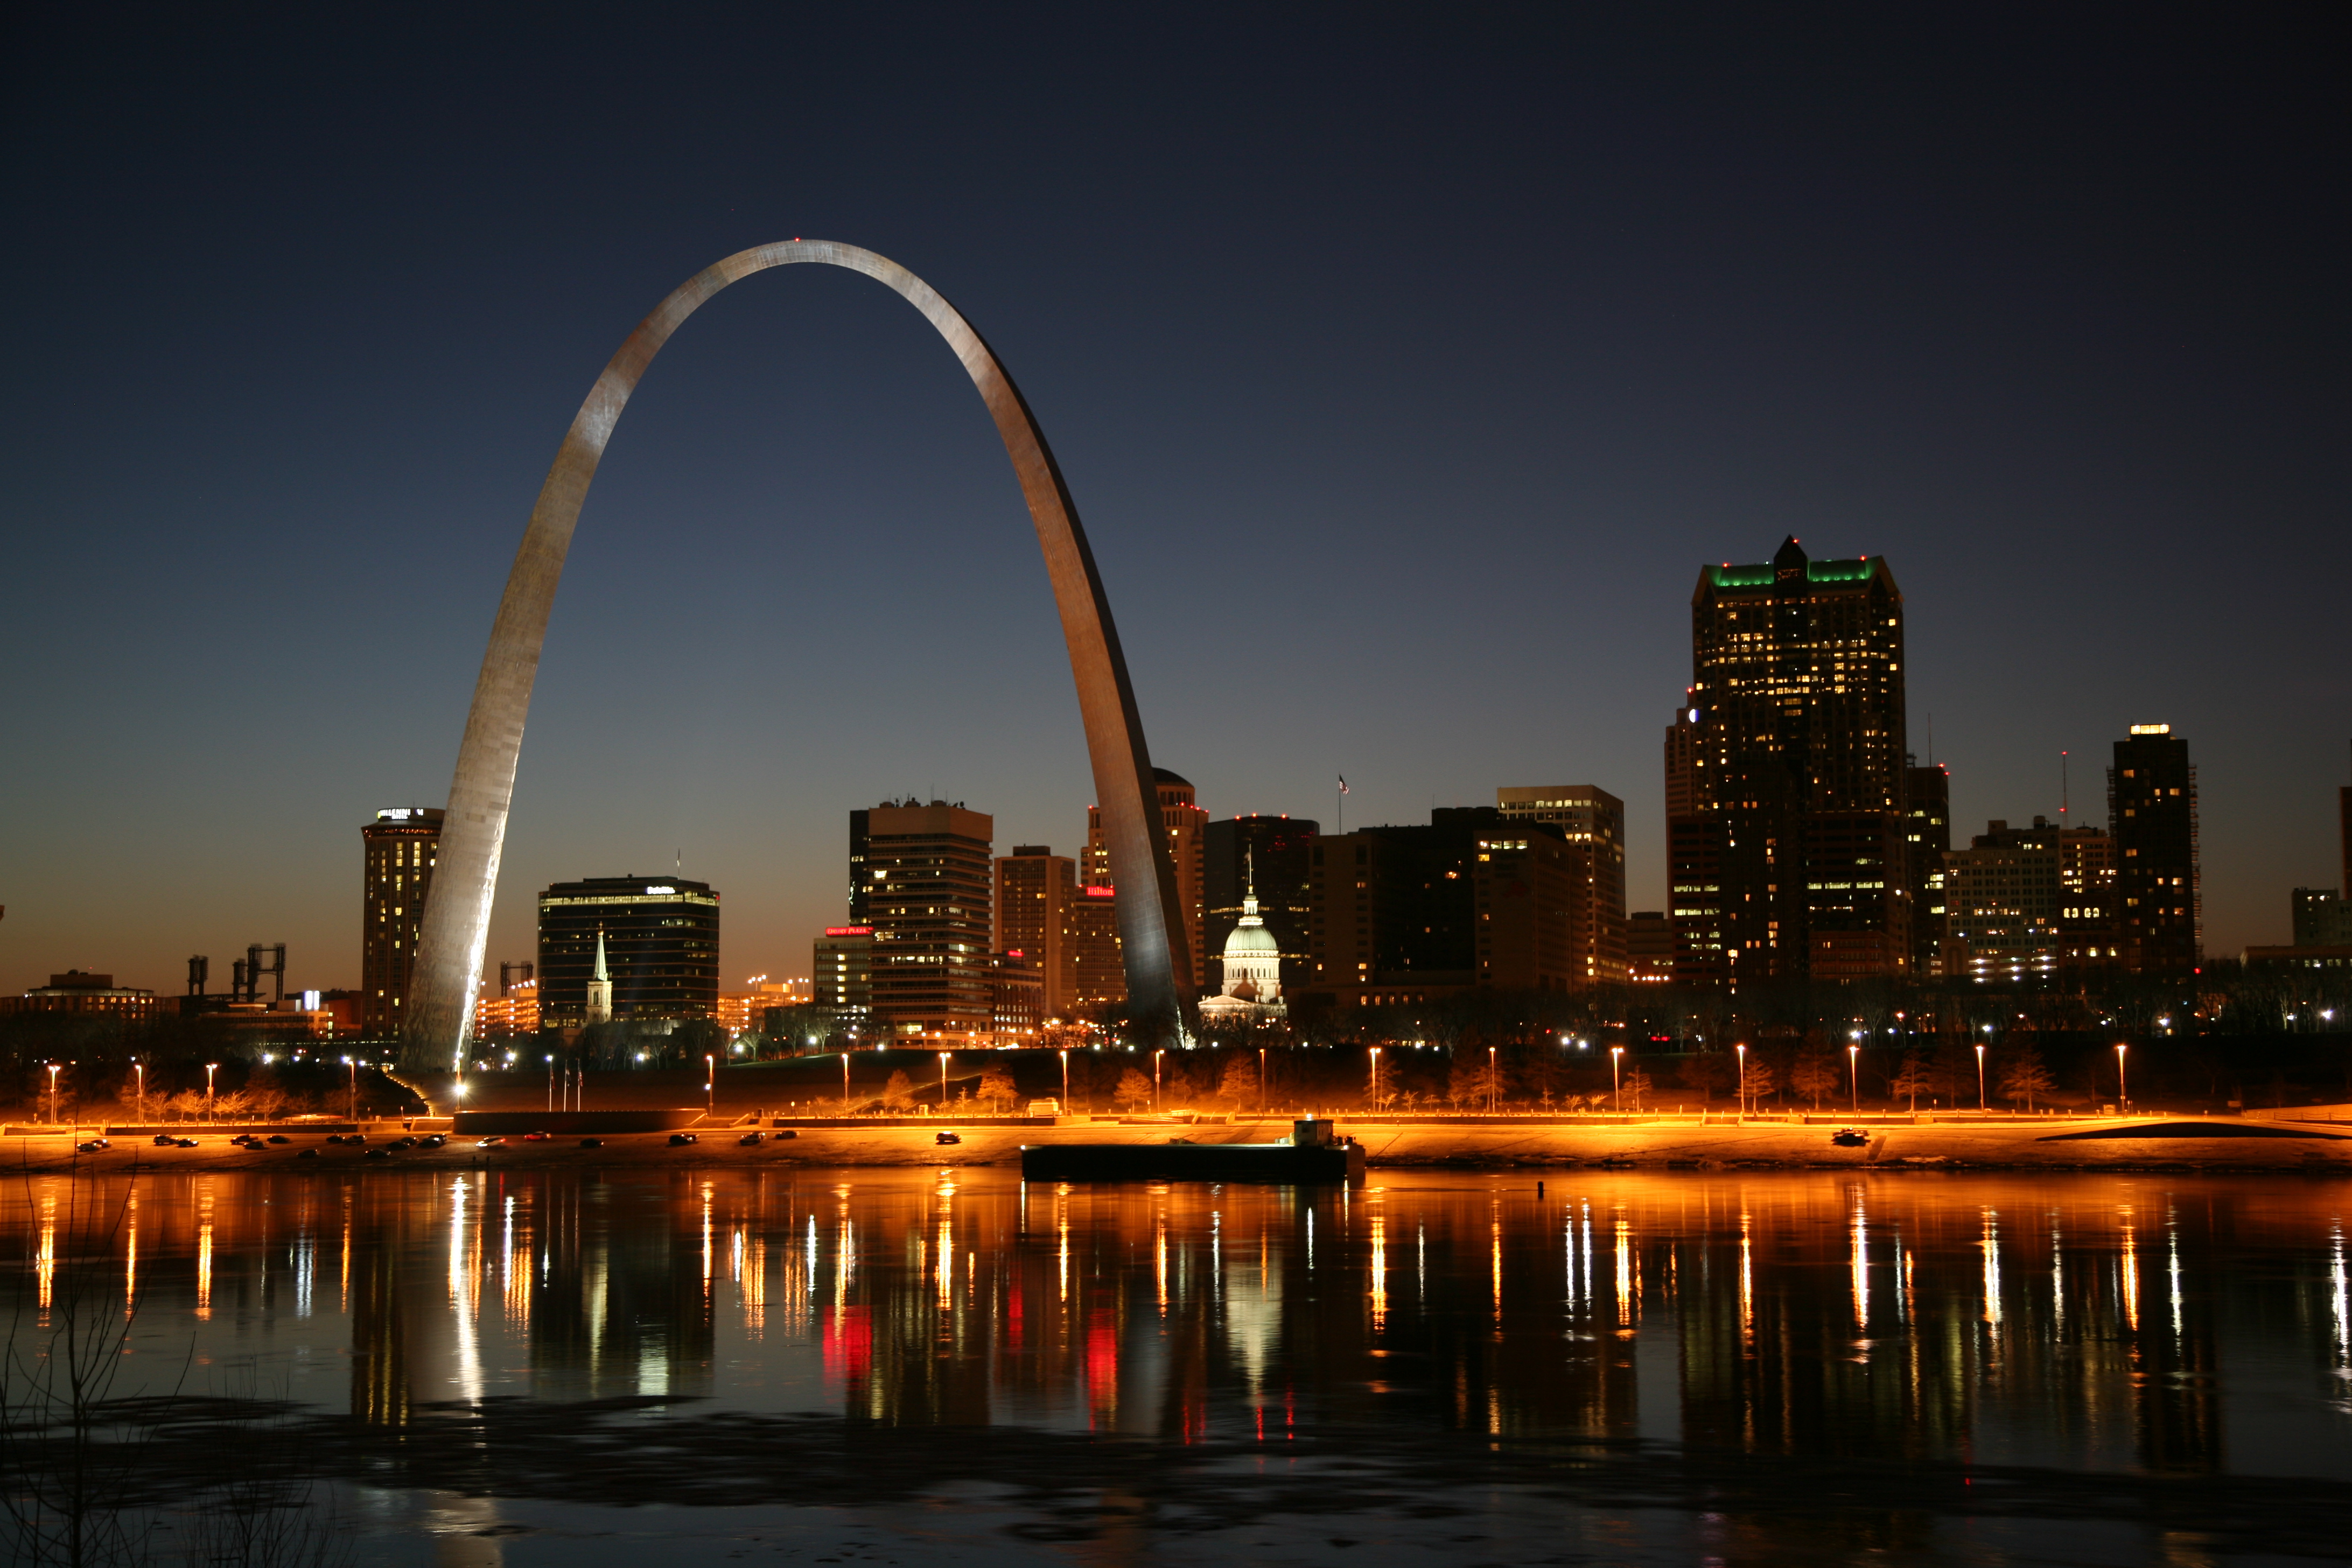 August Fun in Downtown St. Louis | The Gateway Arch